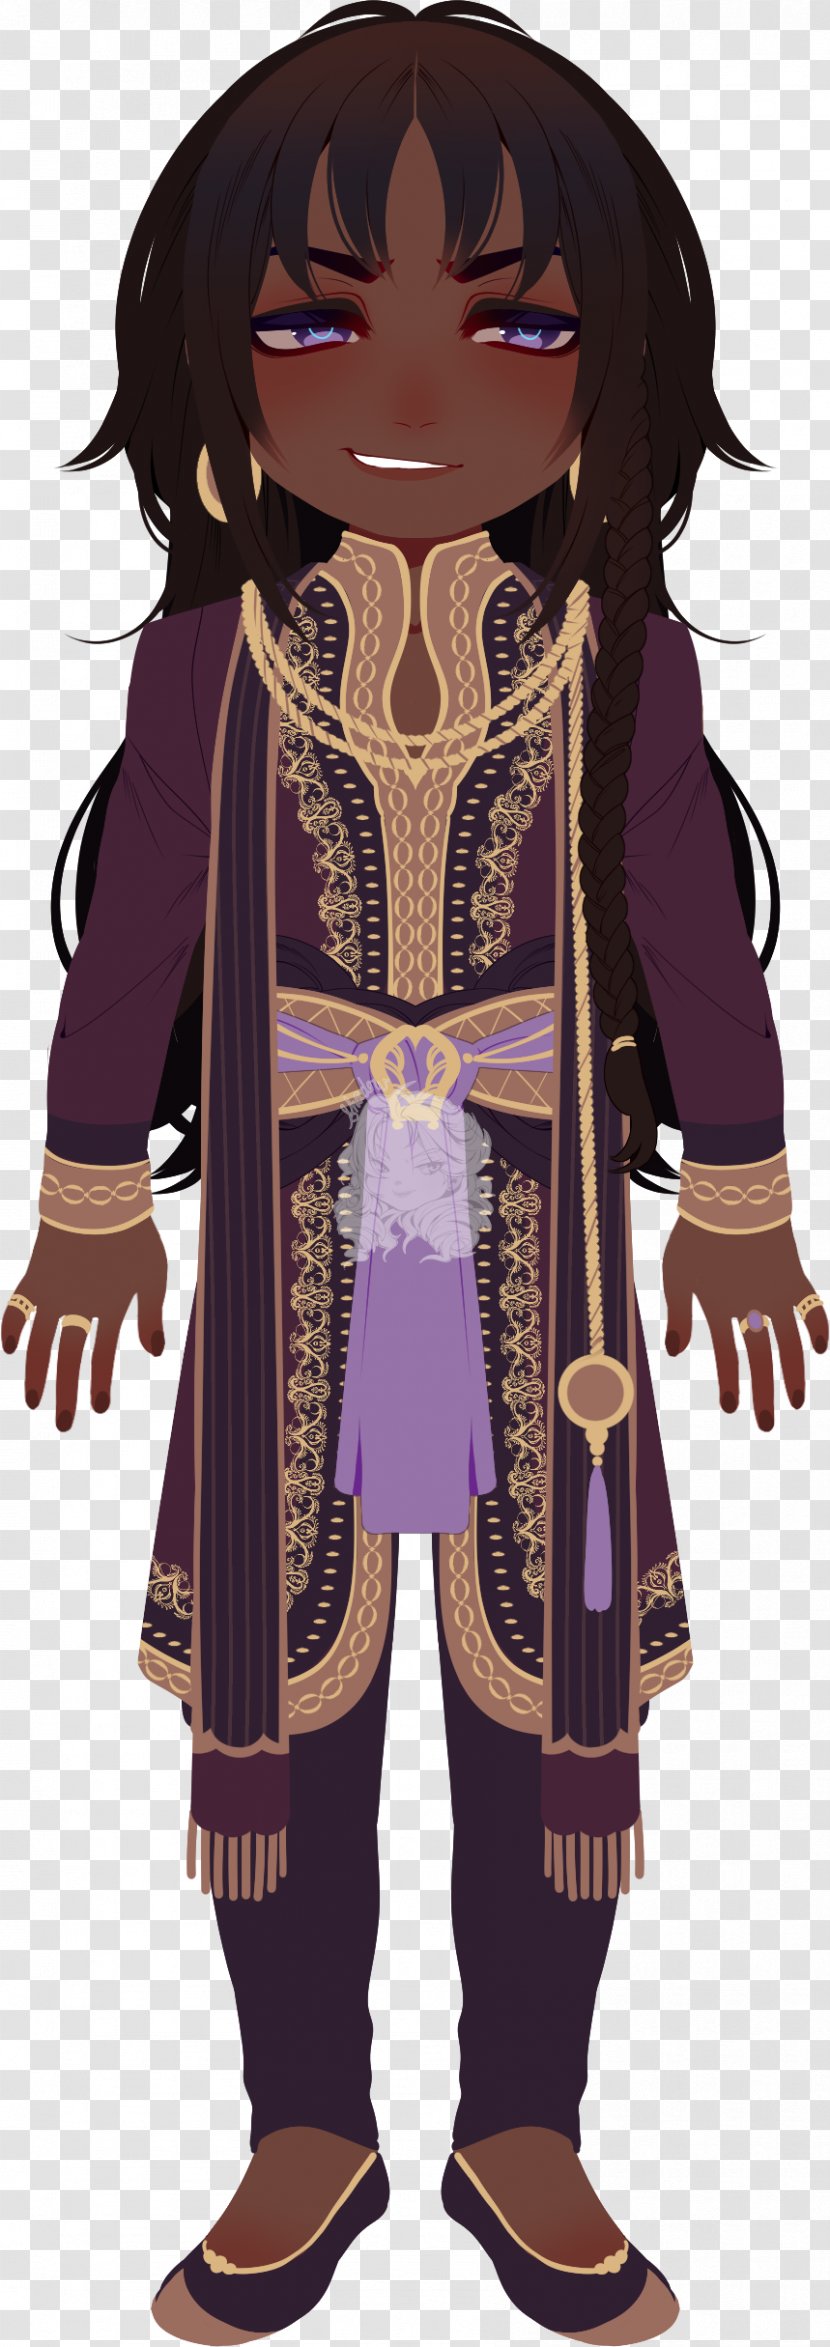 Robe Costume Illustration Character Cartoon - Fiction - Yx Transparent PNG